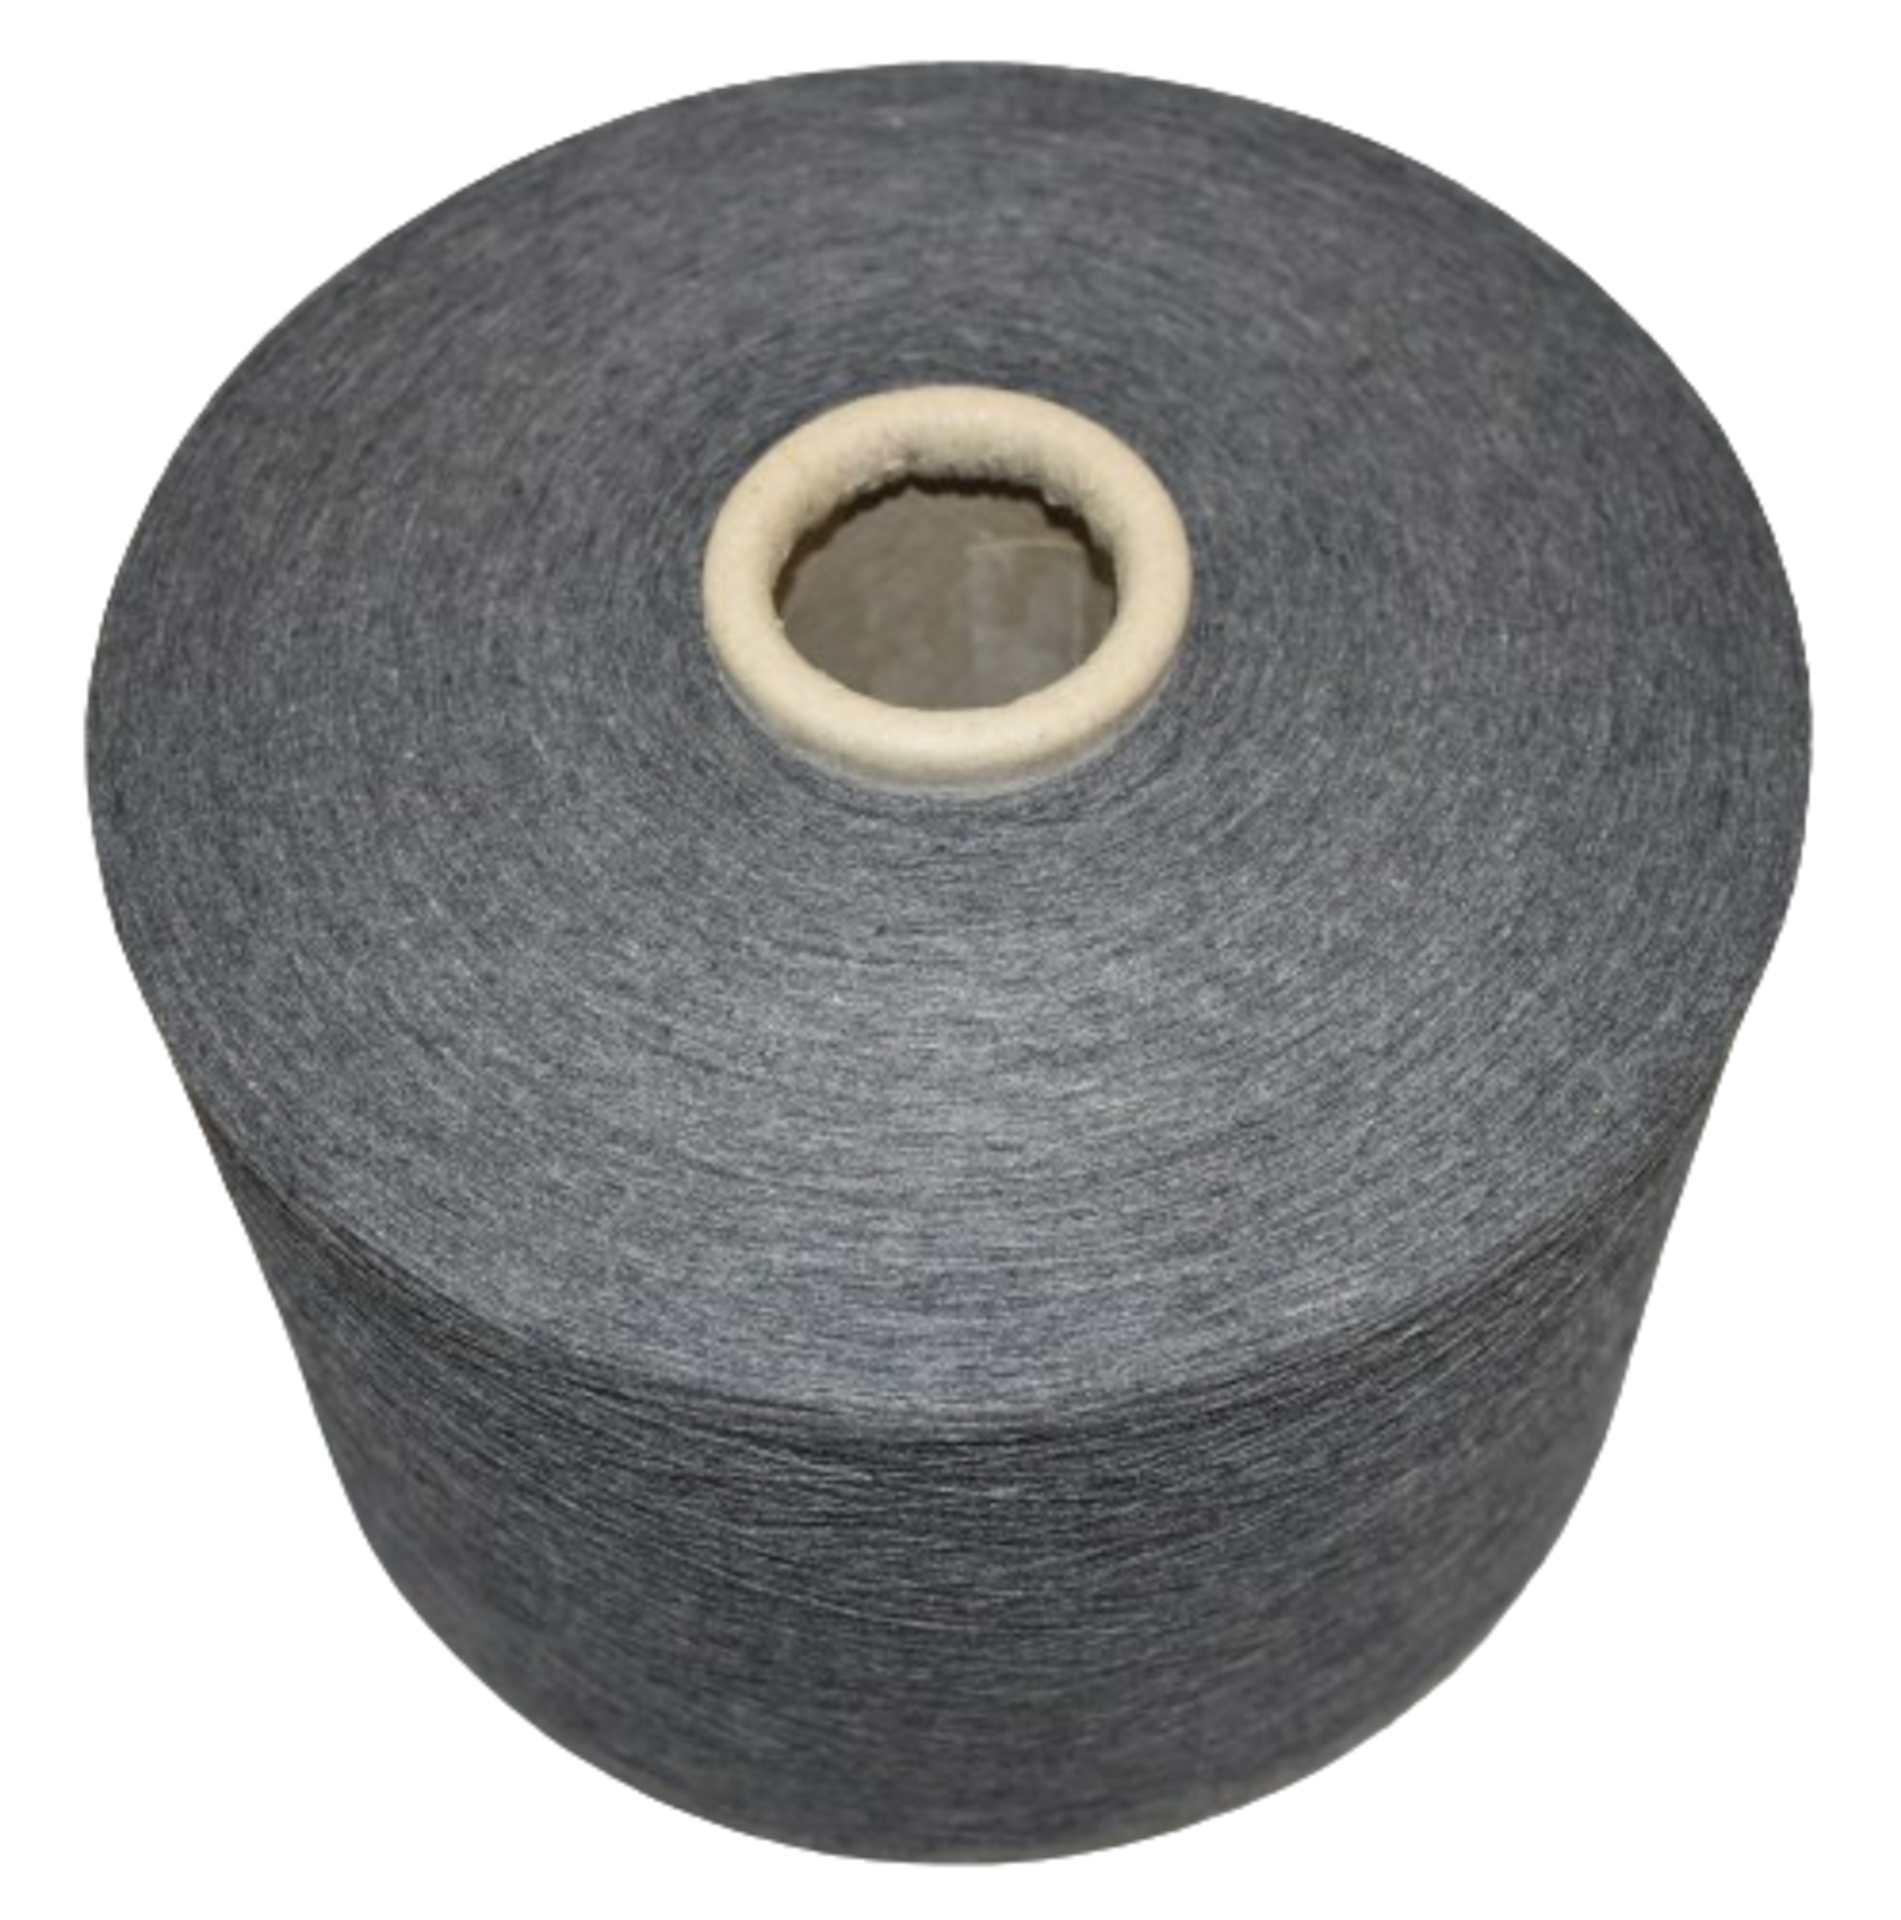 36 x Cones of 1/13 MicroCotton Knitting Yarn - Mid Grey - Approx Weight: 2,500g - New Stock ABL Yarn - Image 2 of 11